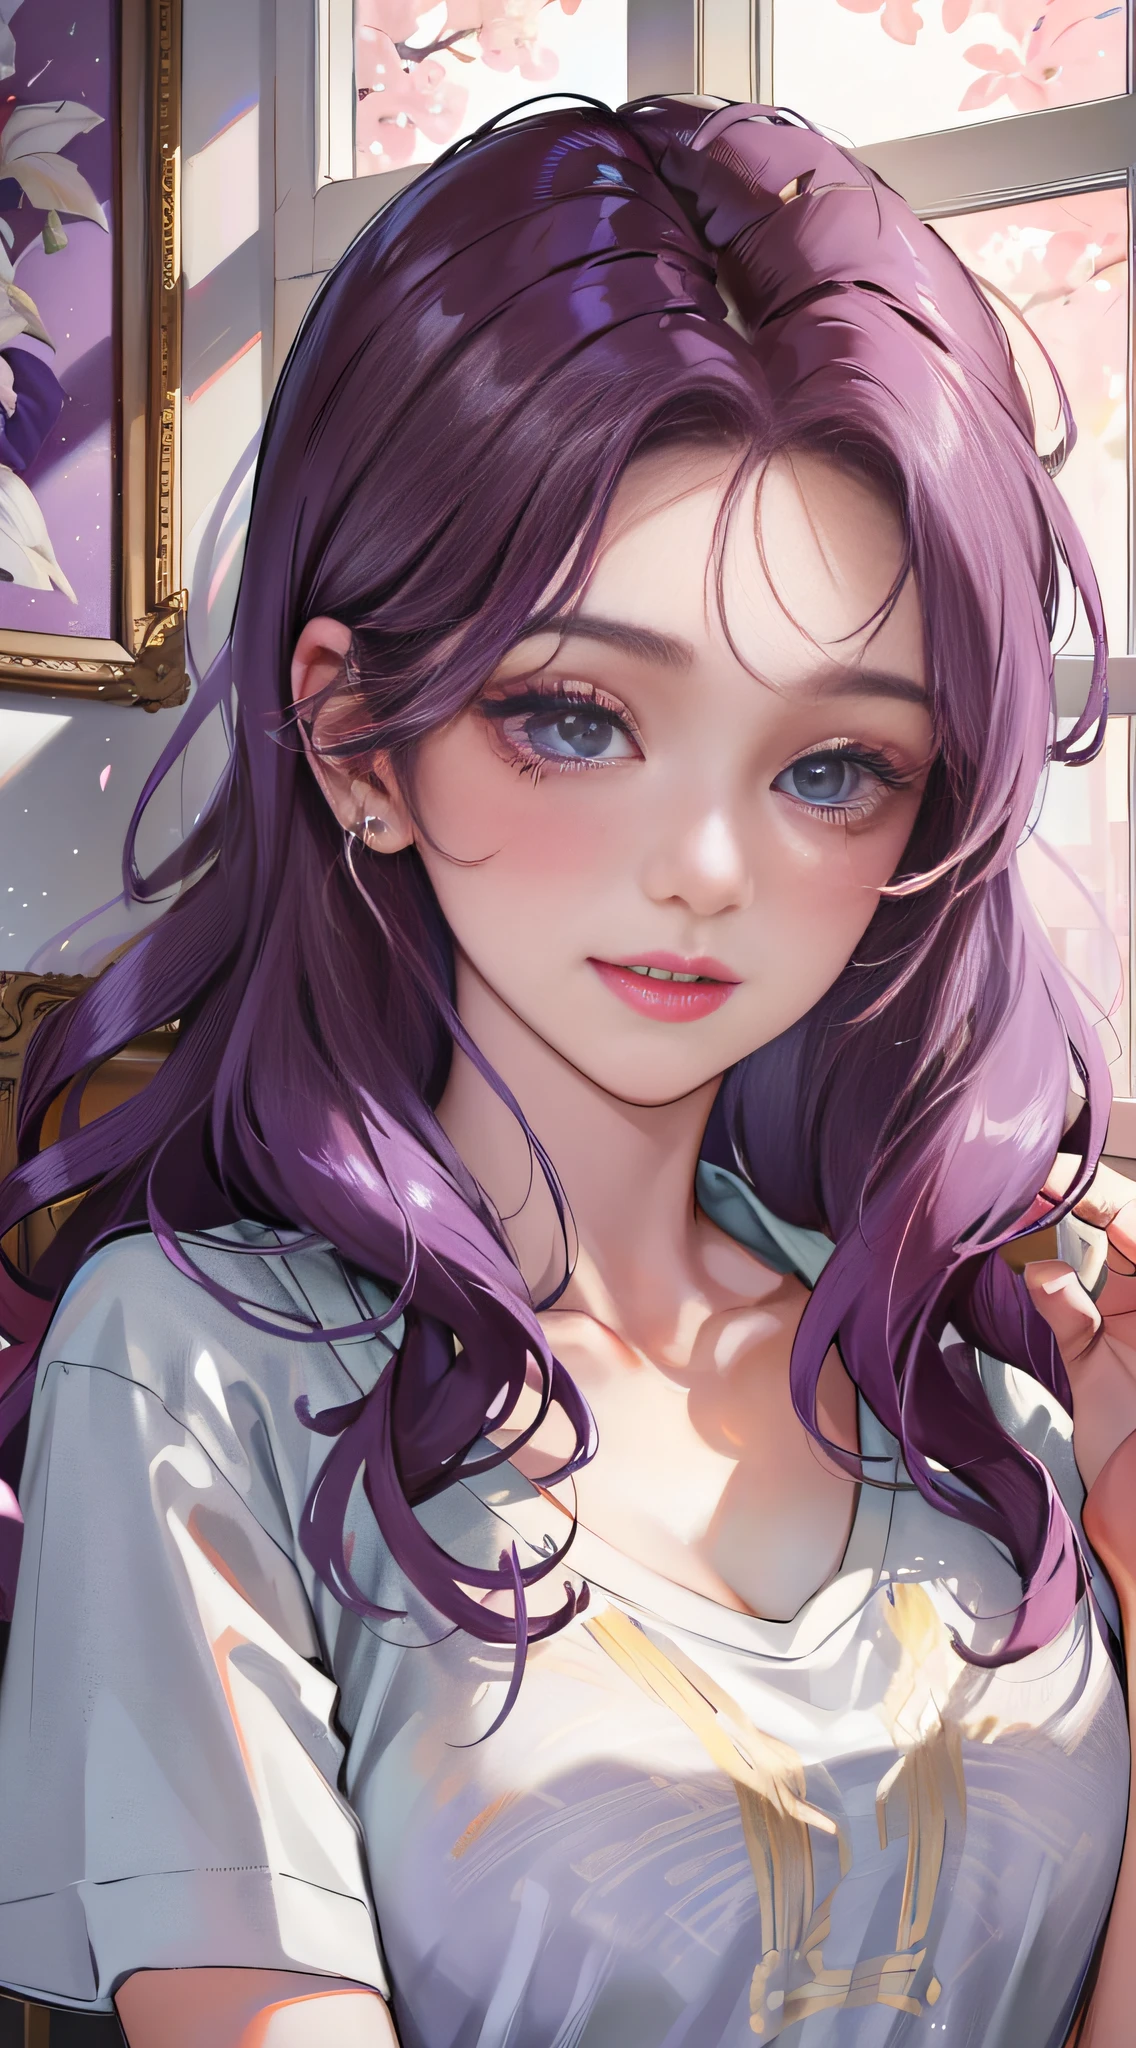 (higher resolution, distinct_image) The best quality, a woman, masterpiece, highly detailed, semi realistic, 21 years old, beautiful, young, handsome, t-shirt, lilac shirt pulled, collar on neck, interior, modern room, window, wake up, morning, blush, smiling